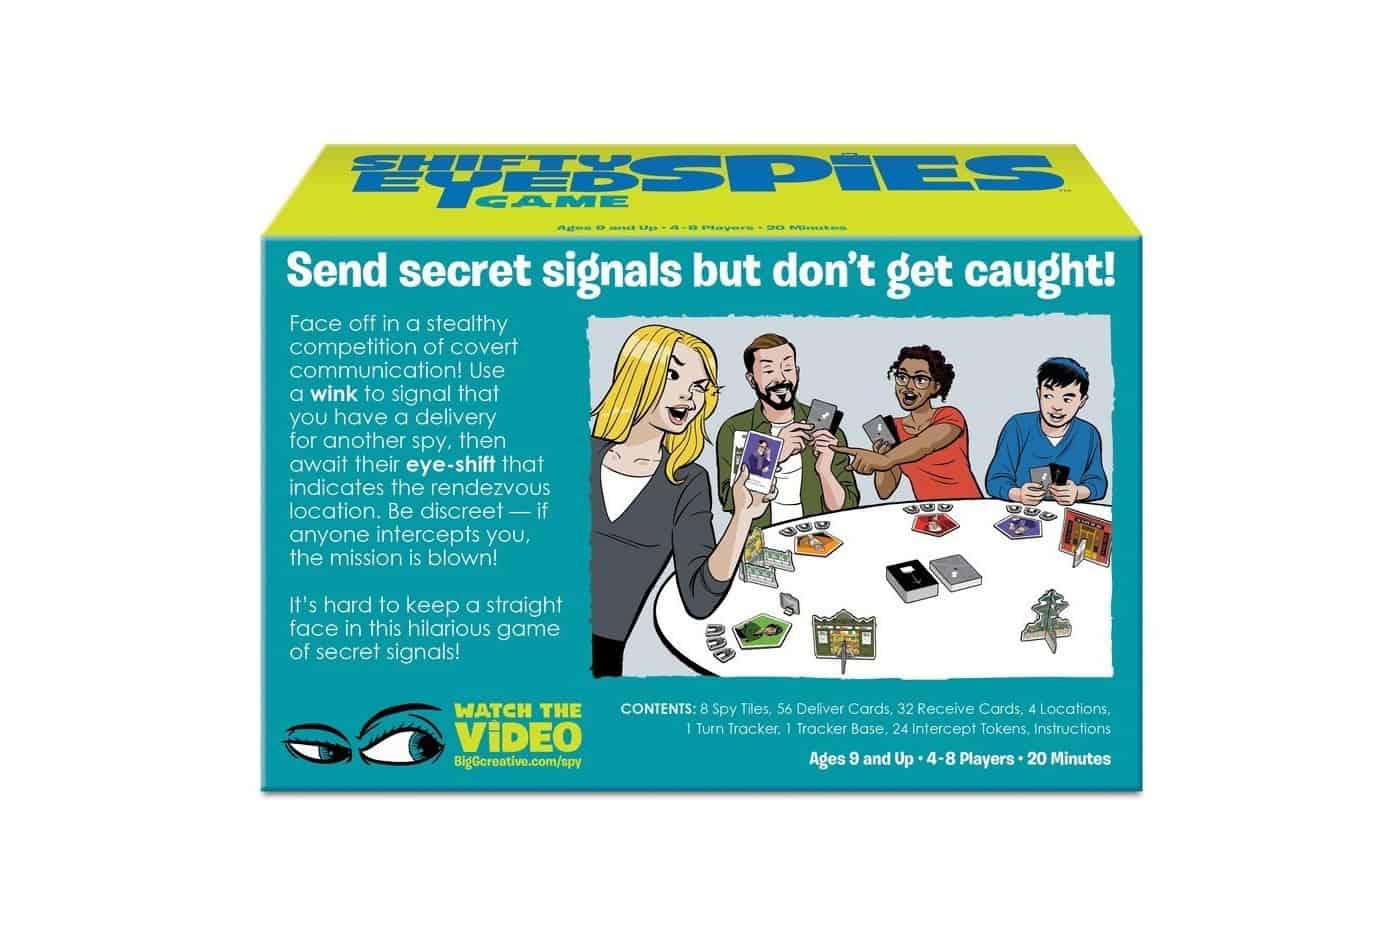 nib-shifty-eyed-spies-game-sneaky-game-of-sending-signals-covert